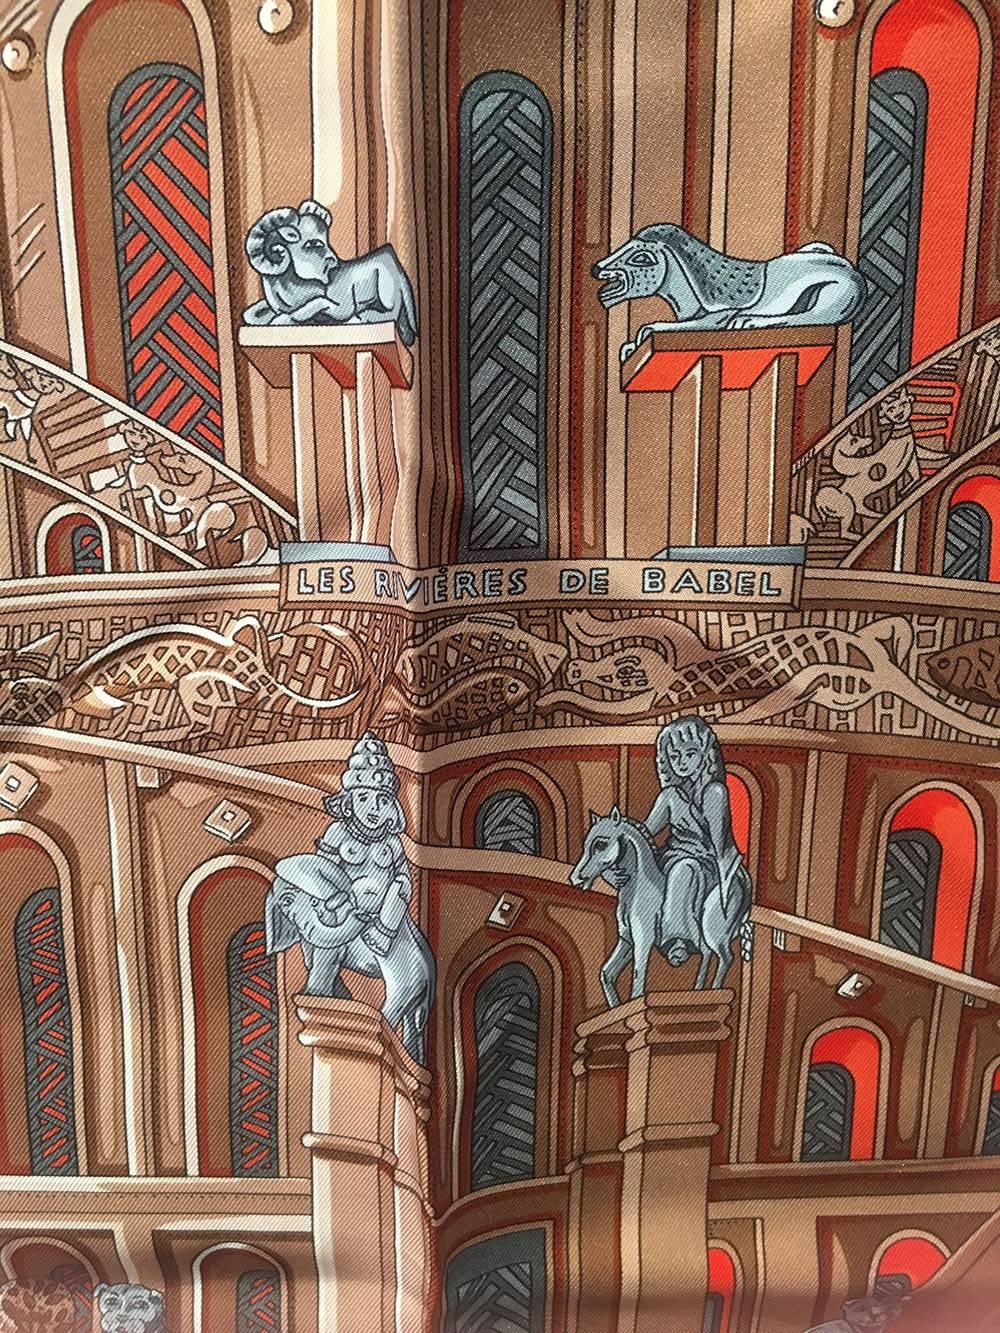 BEAUTIFUL Hermes rivieres de Babel silk scarf in excellent condition.  Original silk screen design c2005 by Annie Faivre features a stunning depiction of the tower of Babylon surrounded by an artistic rendition of the river of babel over a cream